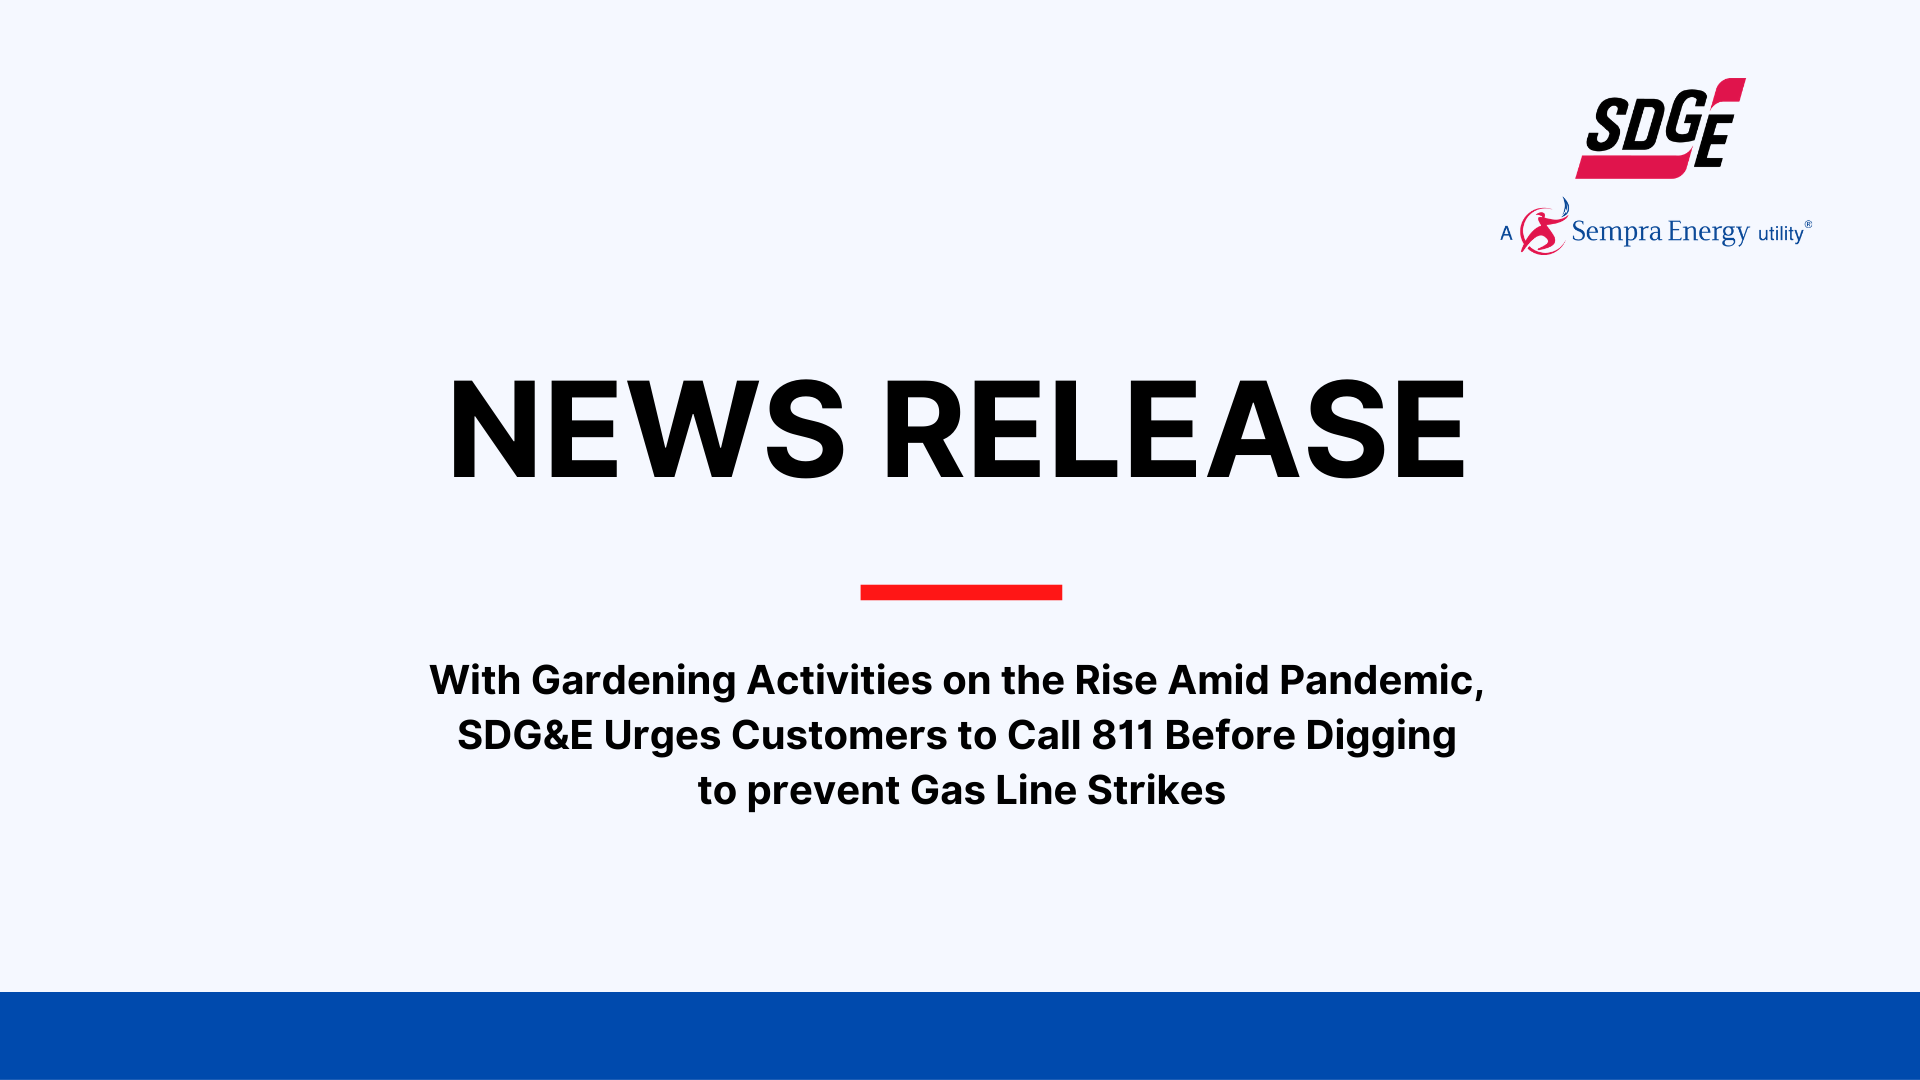 With Gardening Activities on the Rise Amid Pandemic, SDG&E Urges Customers to Call 811 Before Digging to prevent Gas Line Strikes